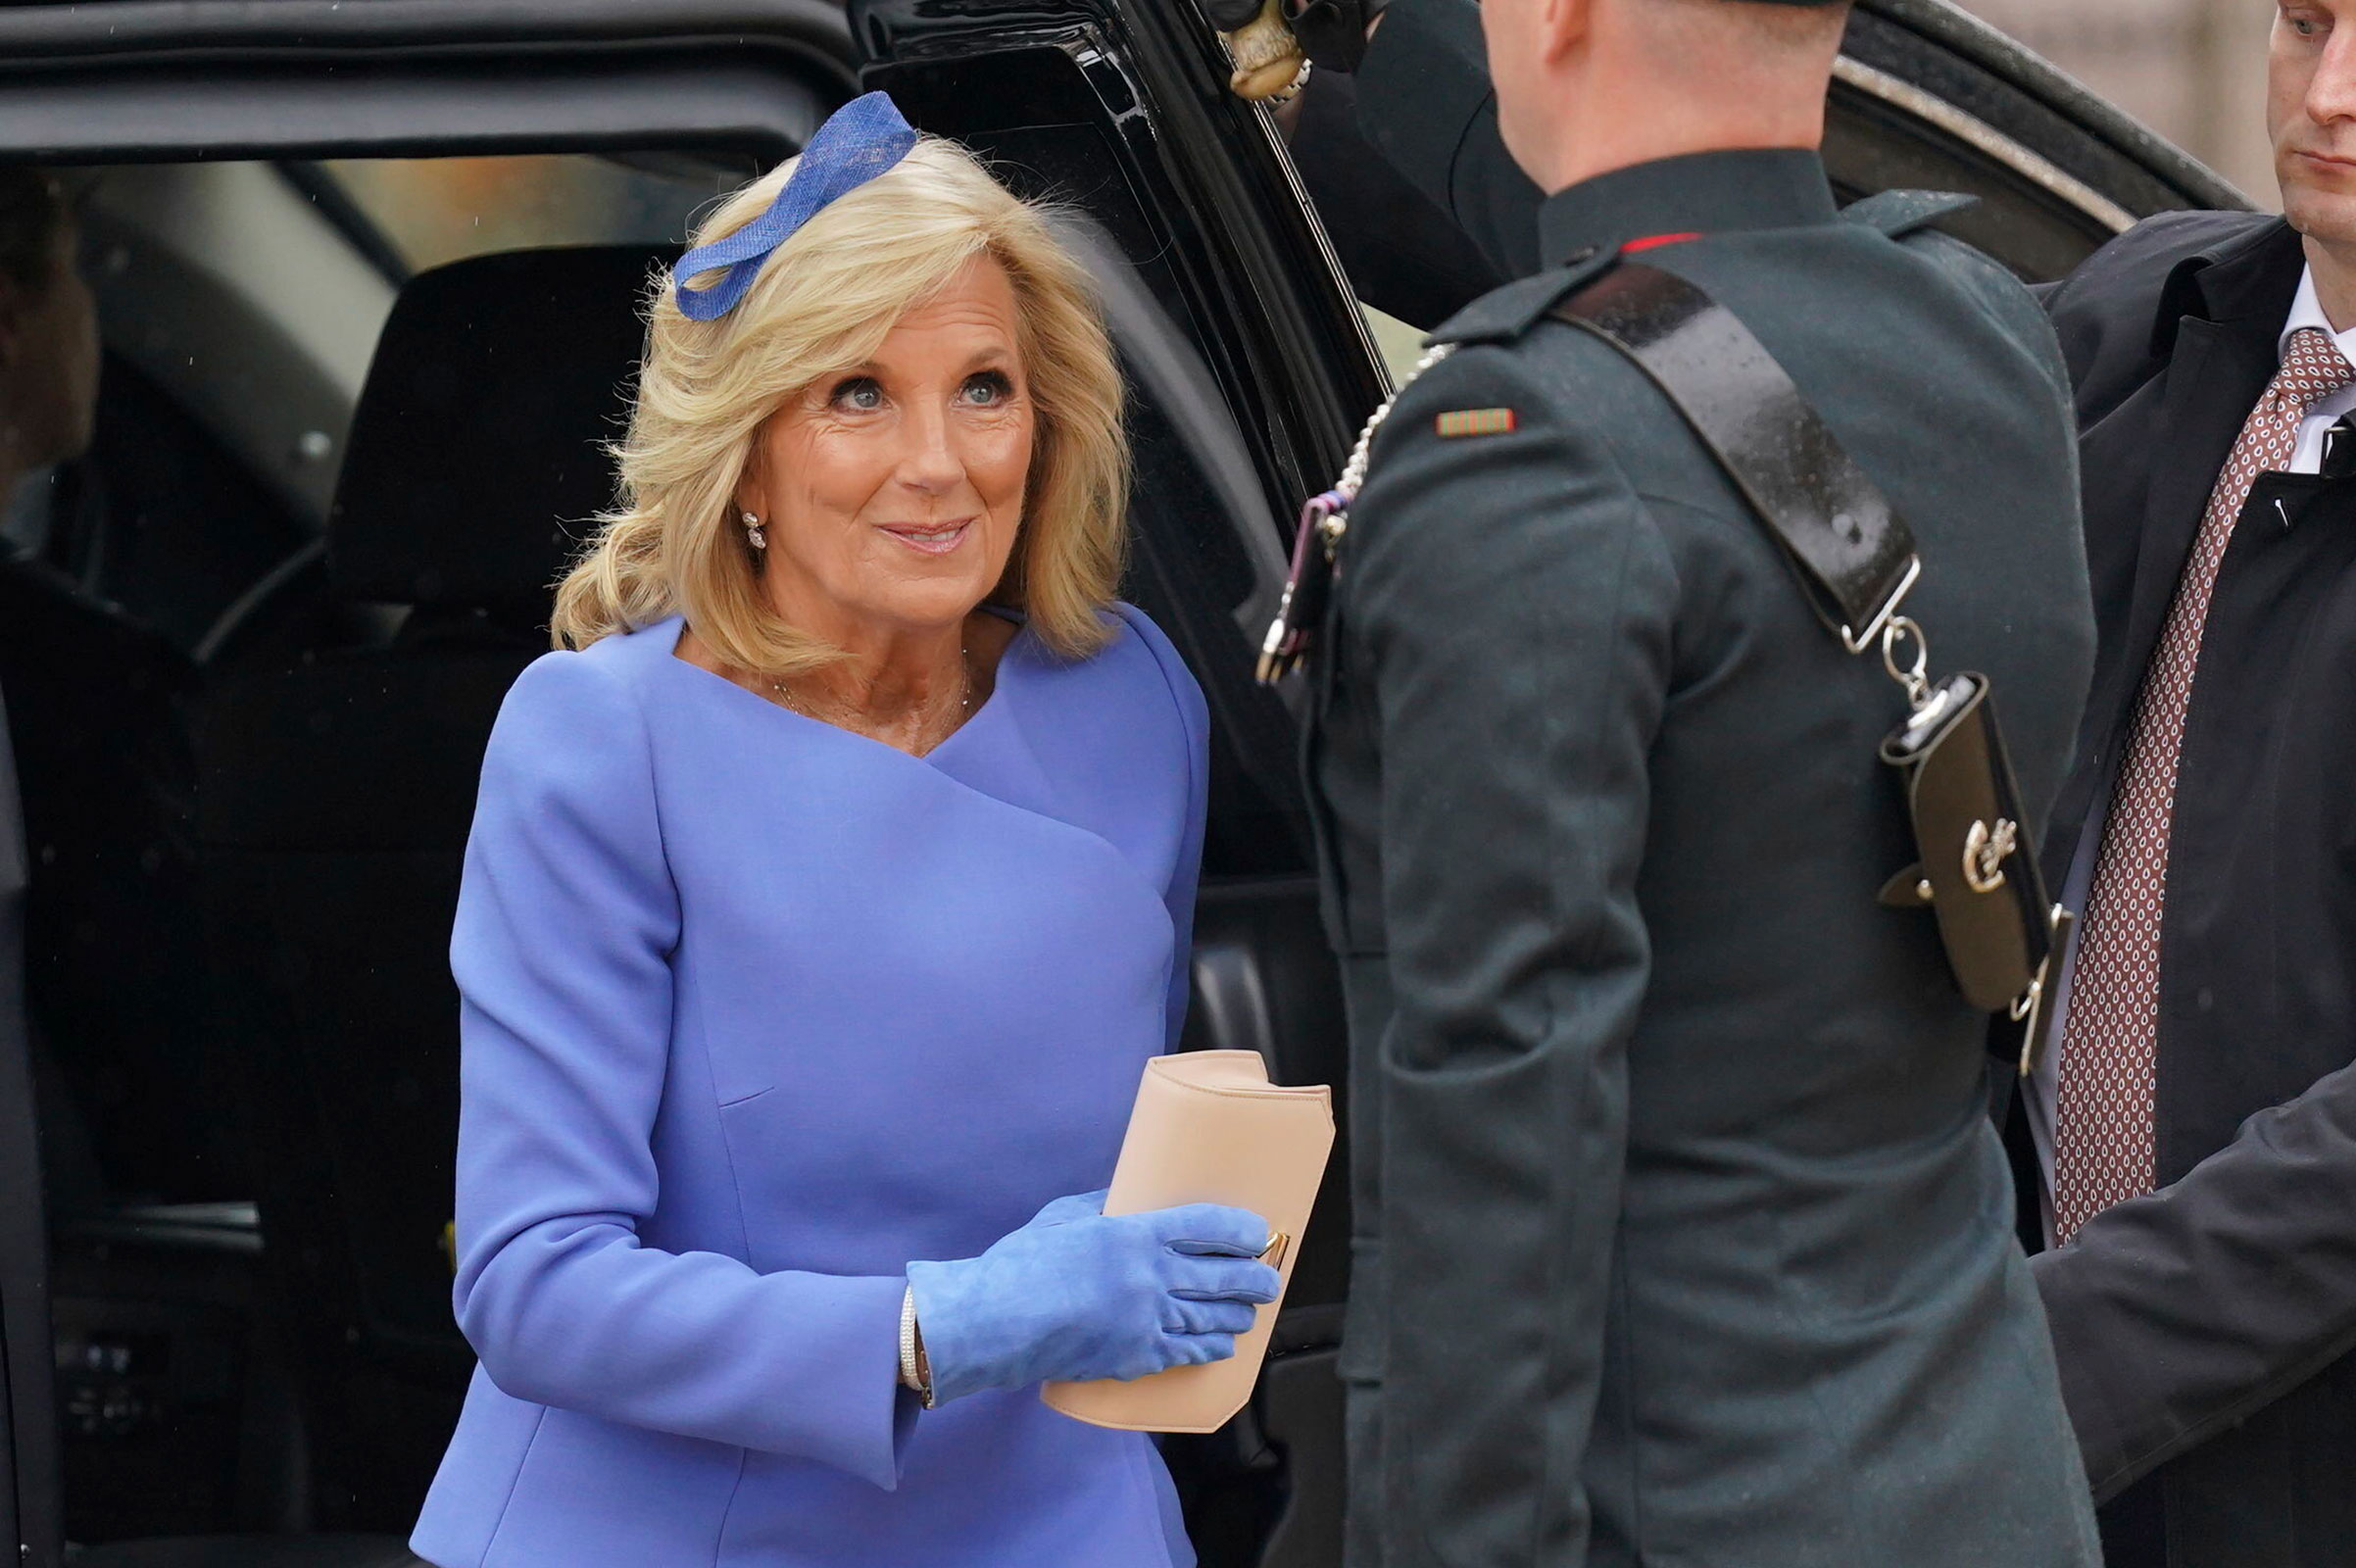 US first lady Jill Biden arrives at Westminster Abbey prior to the coronation ceremony.